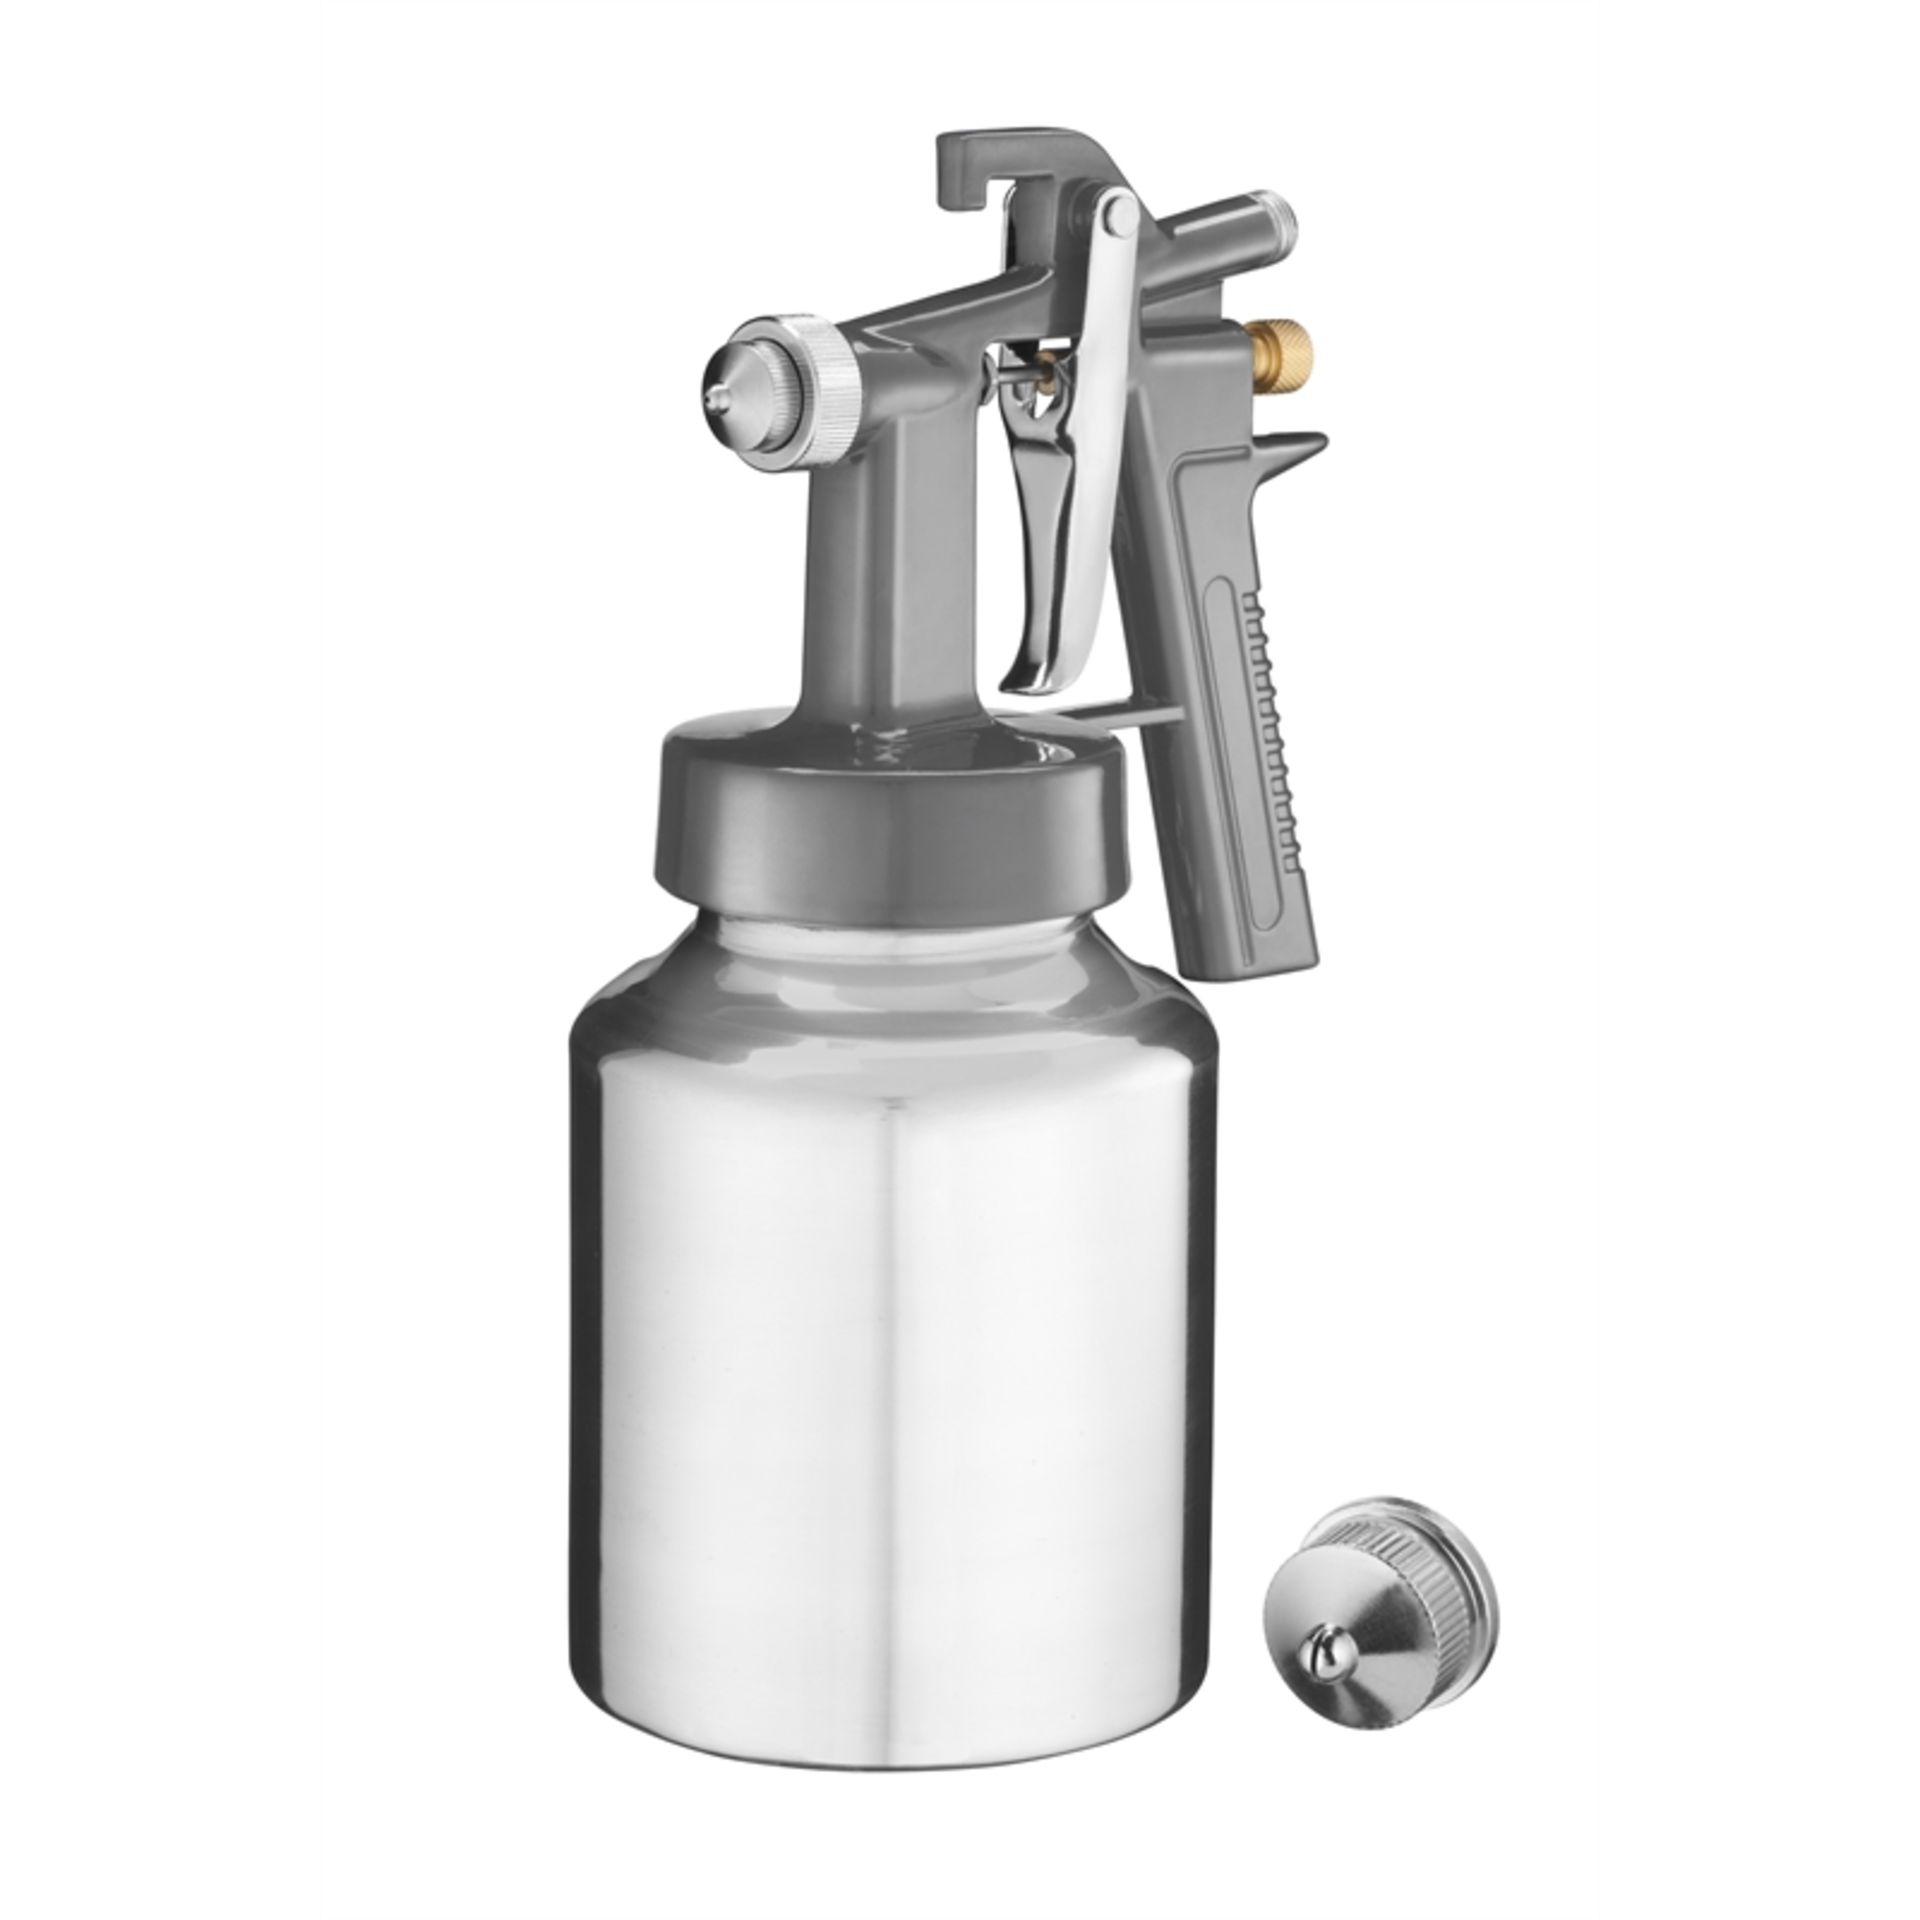 V Brand New Ozito Spray Putty Gun-160-260ml/Min Ideal For Spraying Fillers-Two Nozzles-Fluid